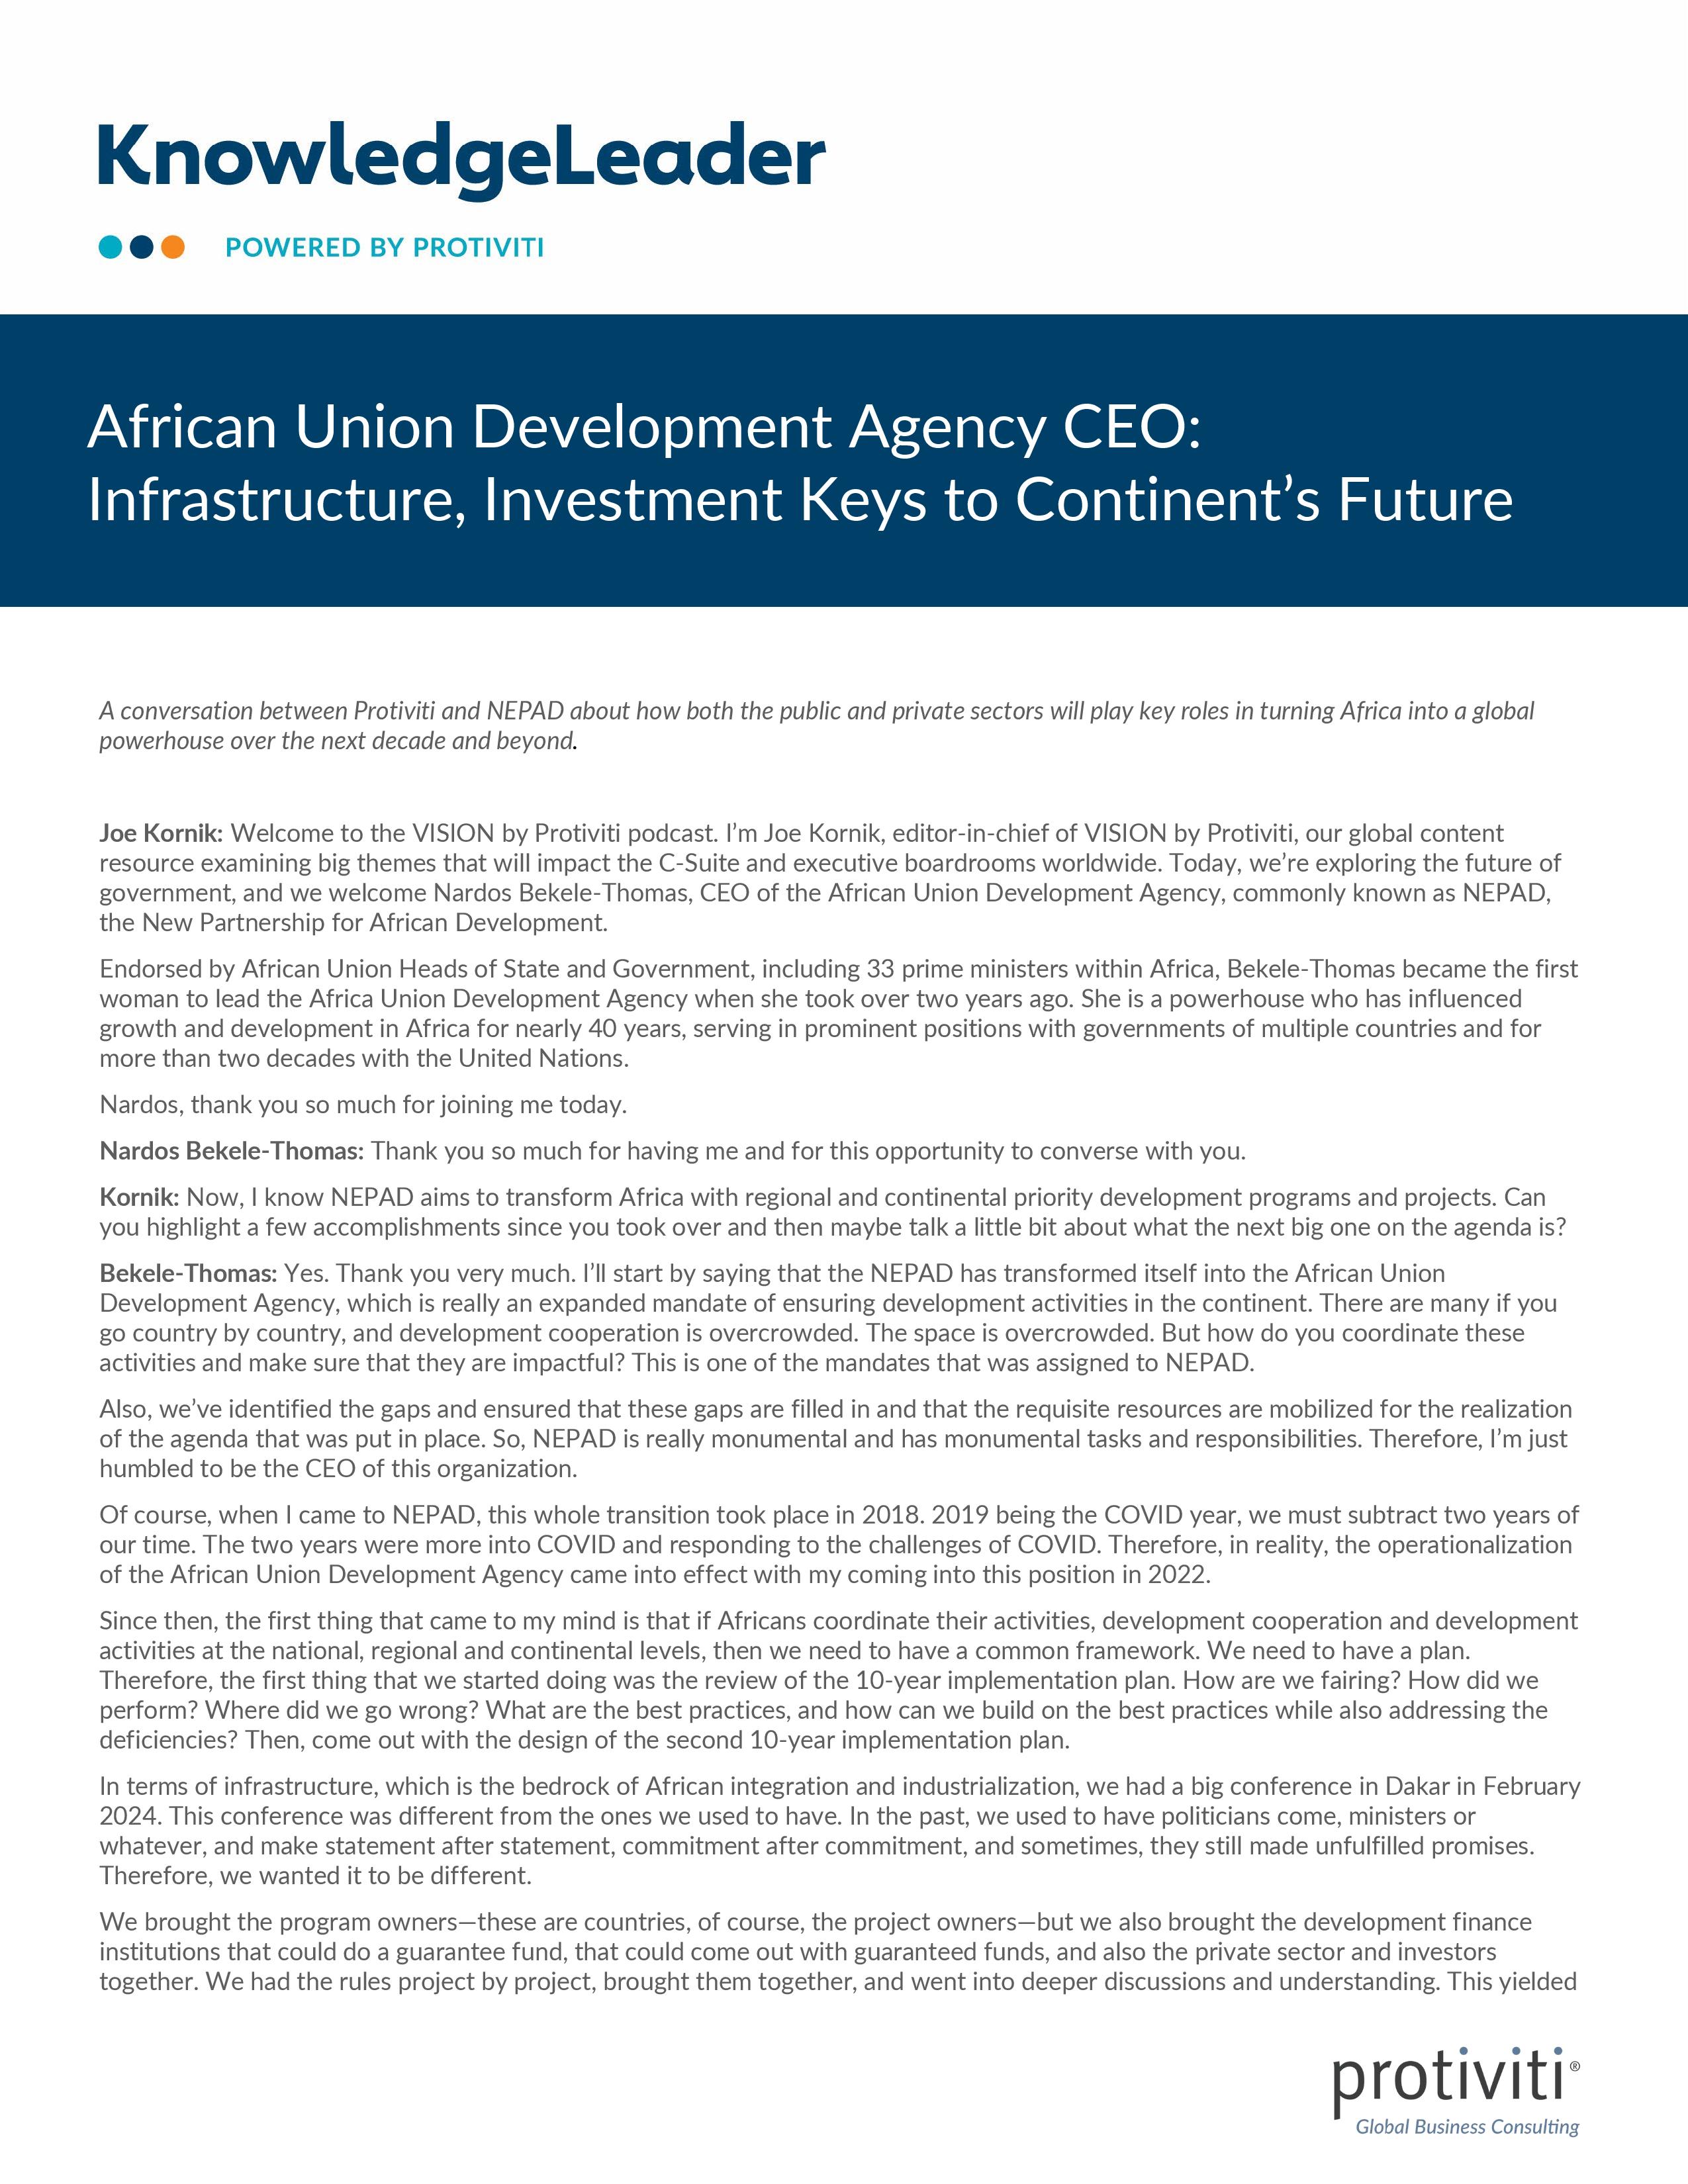 screenshot of the first page of African Union Development Agency CEO Infrastructure, Investment Keys to Continent’s Future